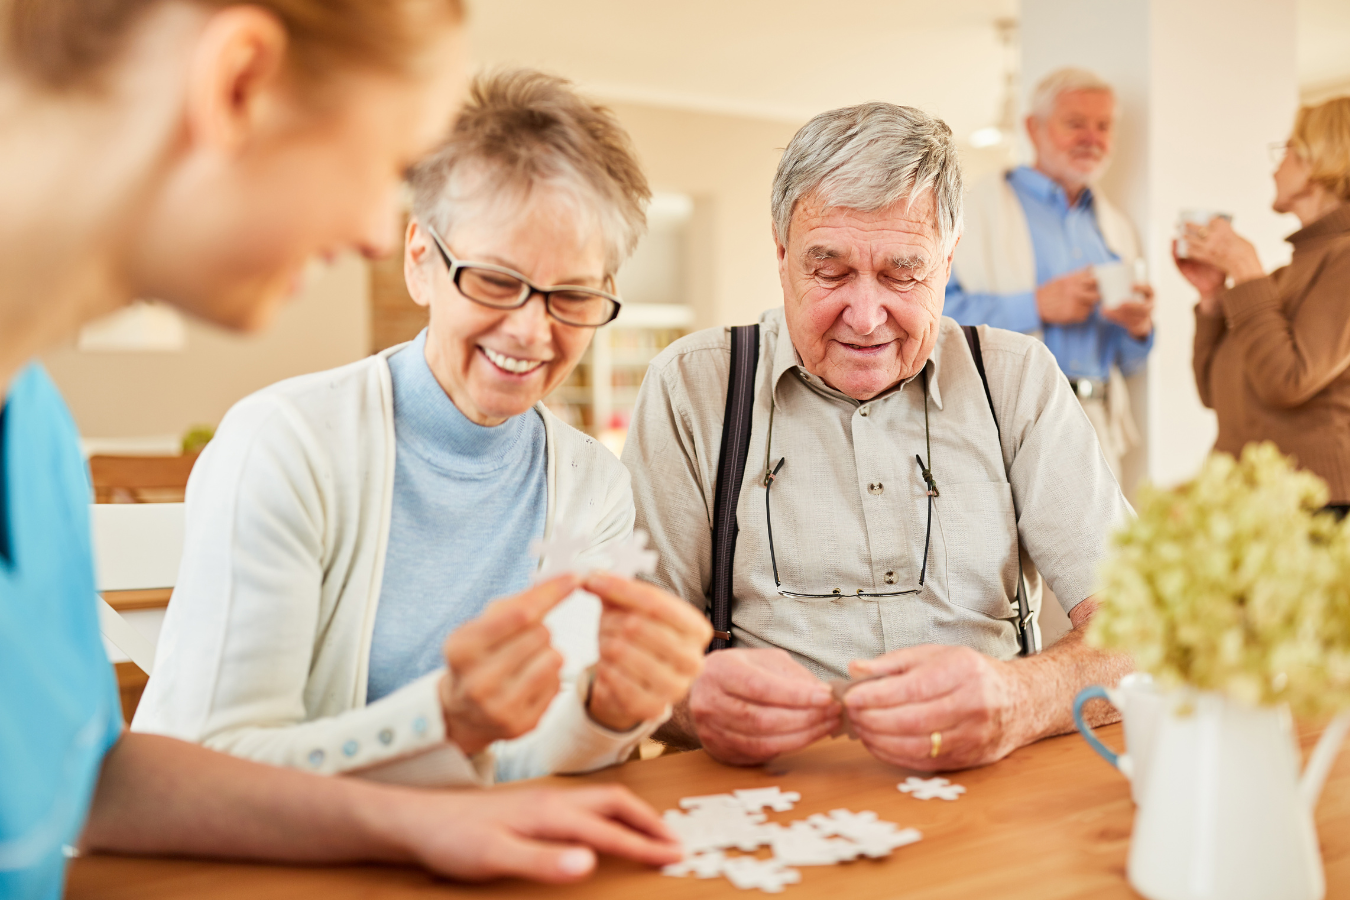 A healthcare professional helping two seniors with a puzzle at a senior citizen charity. Sparkrock 365 ERP supports senior citizen charities, optimizing efficiency for enhanced care and assistance.